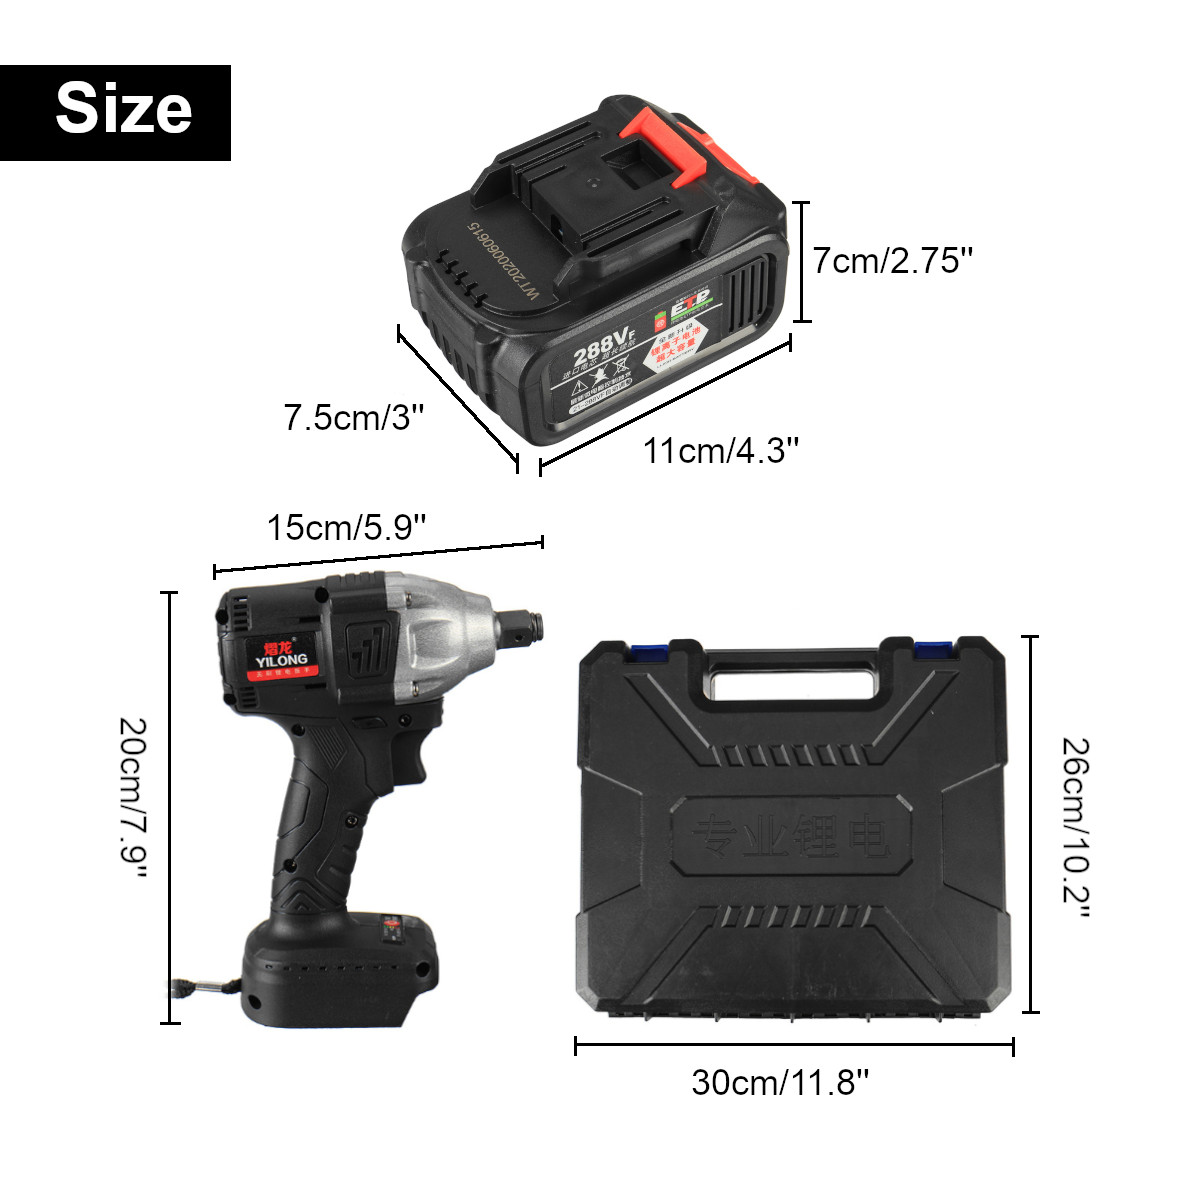 288VF-Cordless-Brushless-Electric-Wrench-600Nm-Impact-Wrench-20000mAh-Recharge-1751574-7